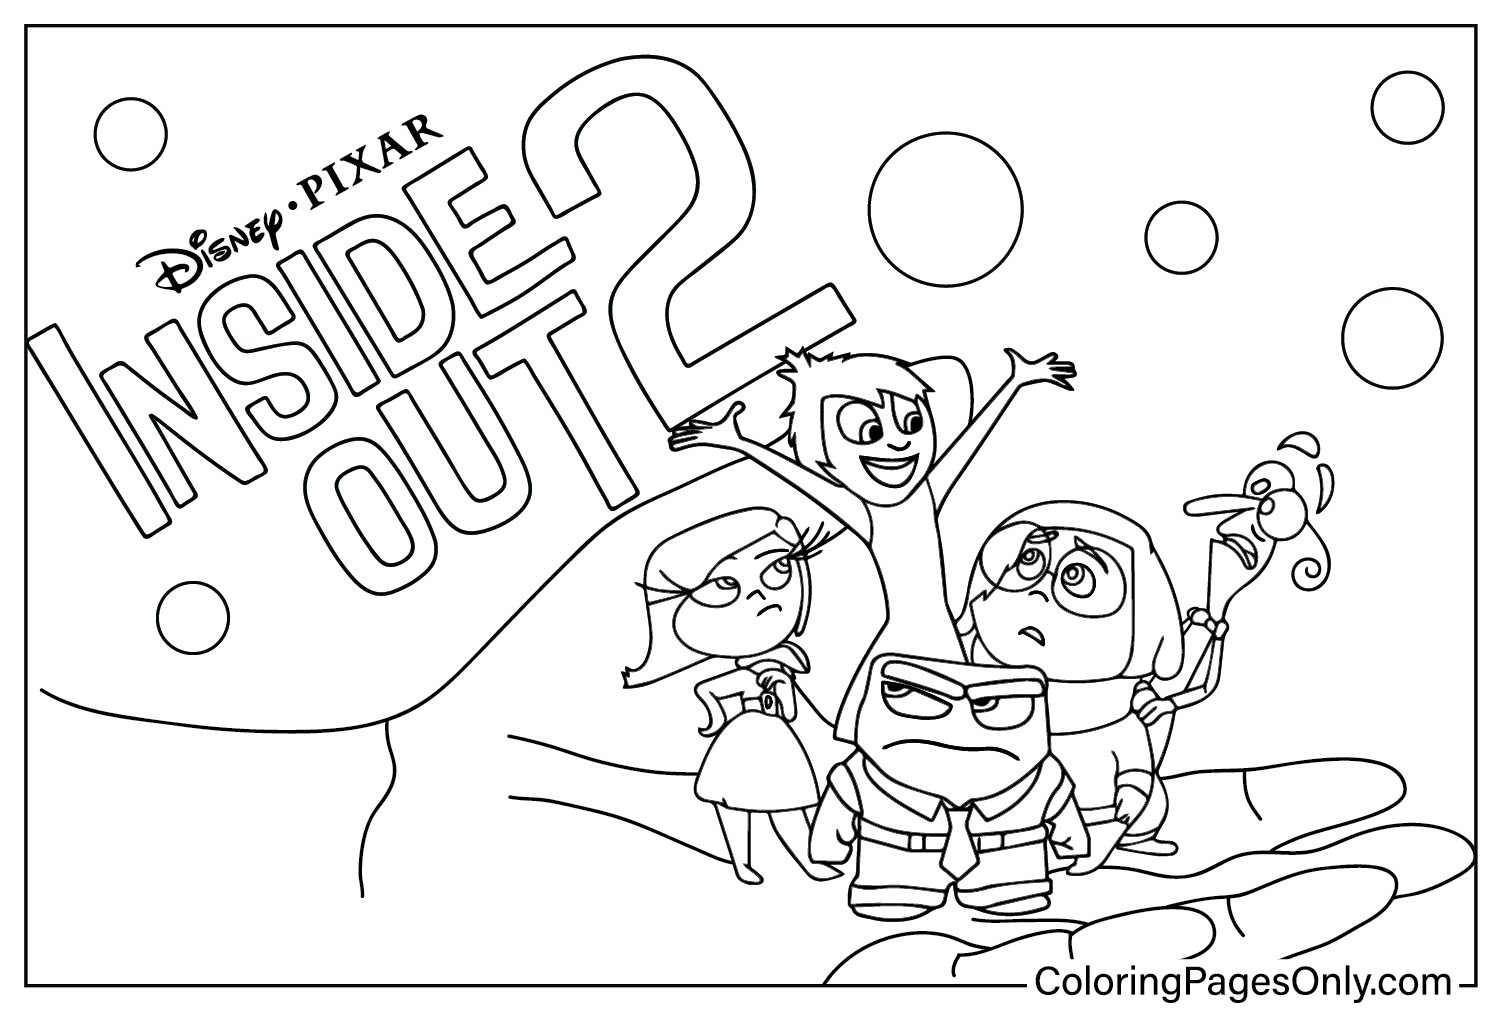 Coloring Page Inside Out 2 from Inside Out 2